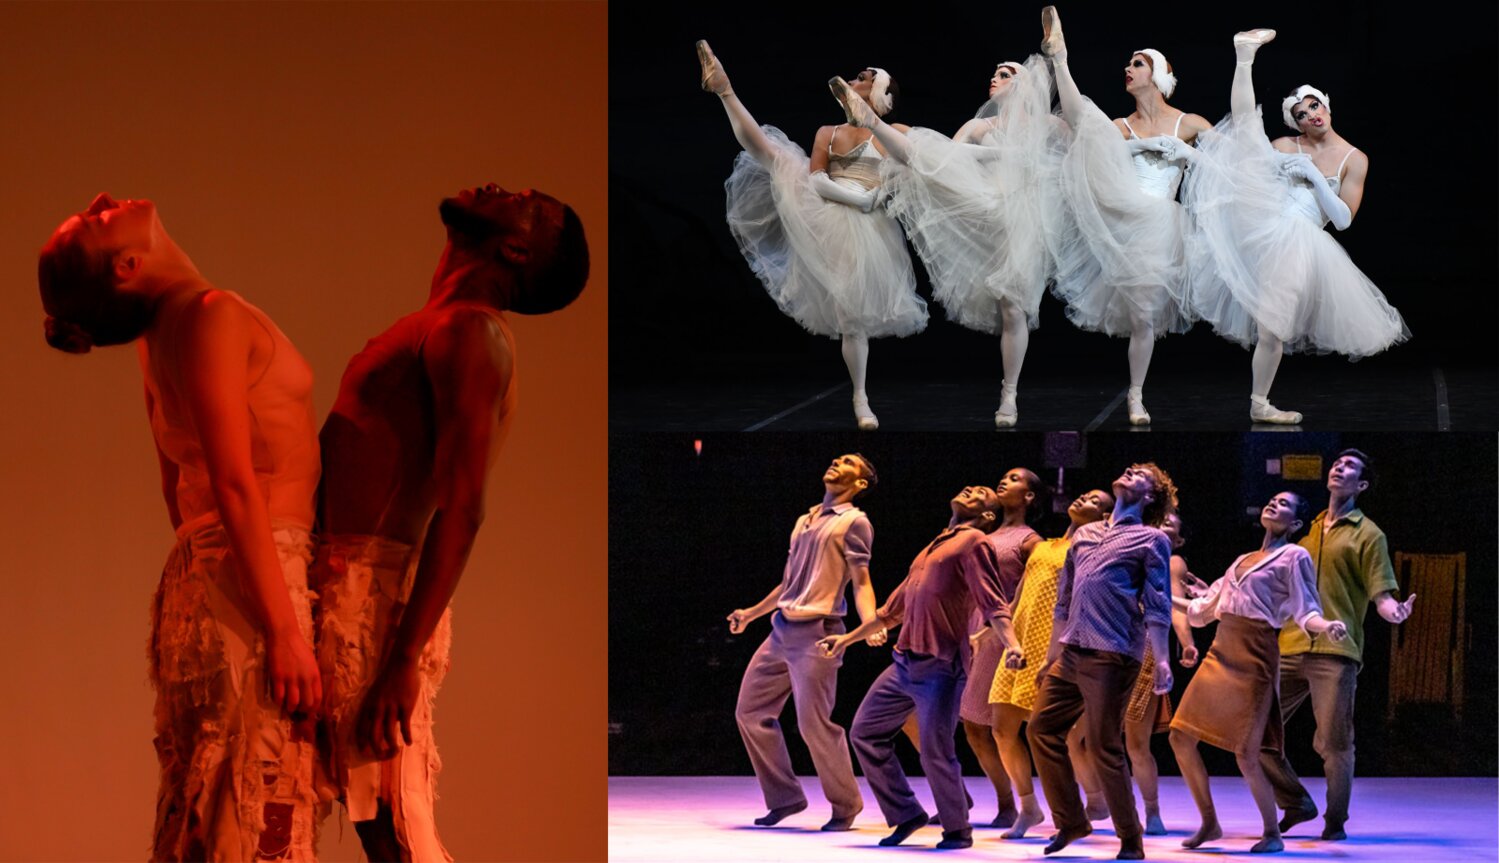 Jacob Jonas The Company, Les Ballet Trockadero de Monet Carlo and Gibney Company (clockwise from left) are the three of the featured companies in the 2023–24 dance series at Scottsdale Center for the Performing Arts.